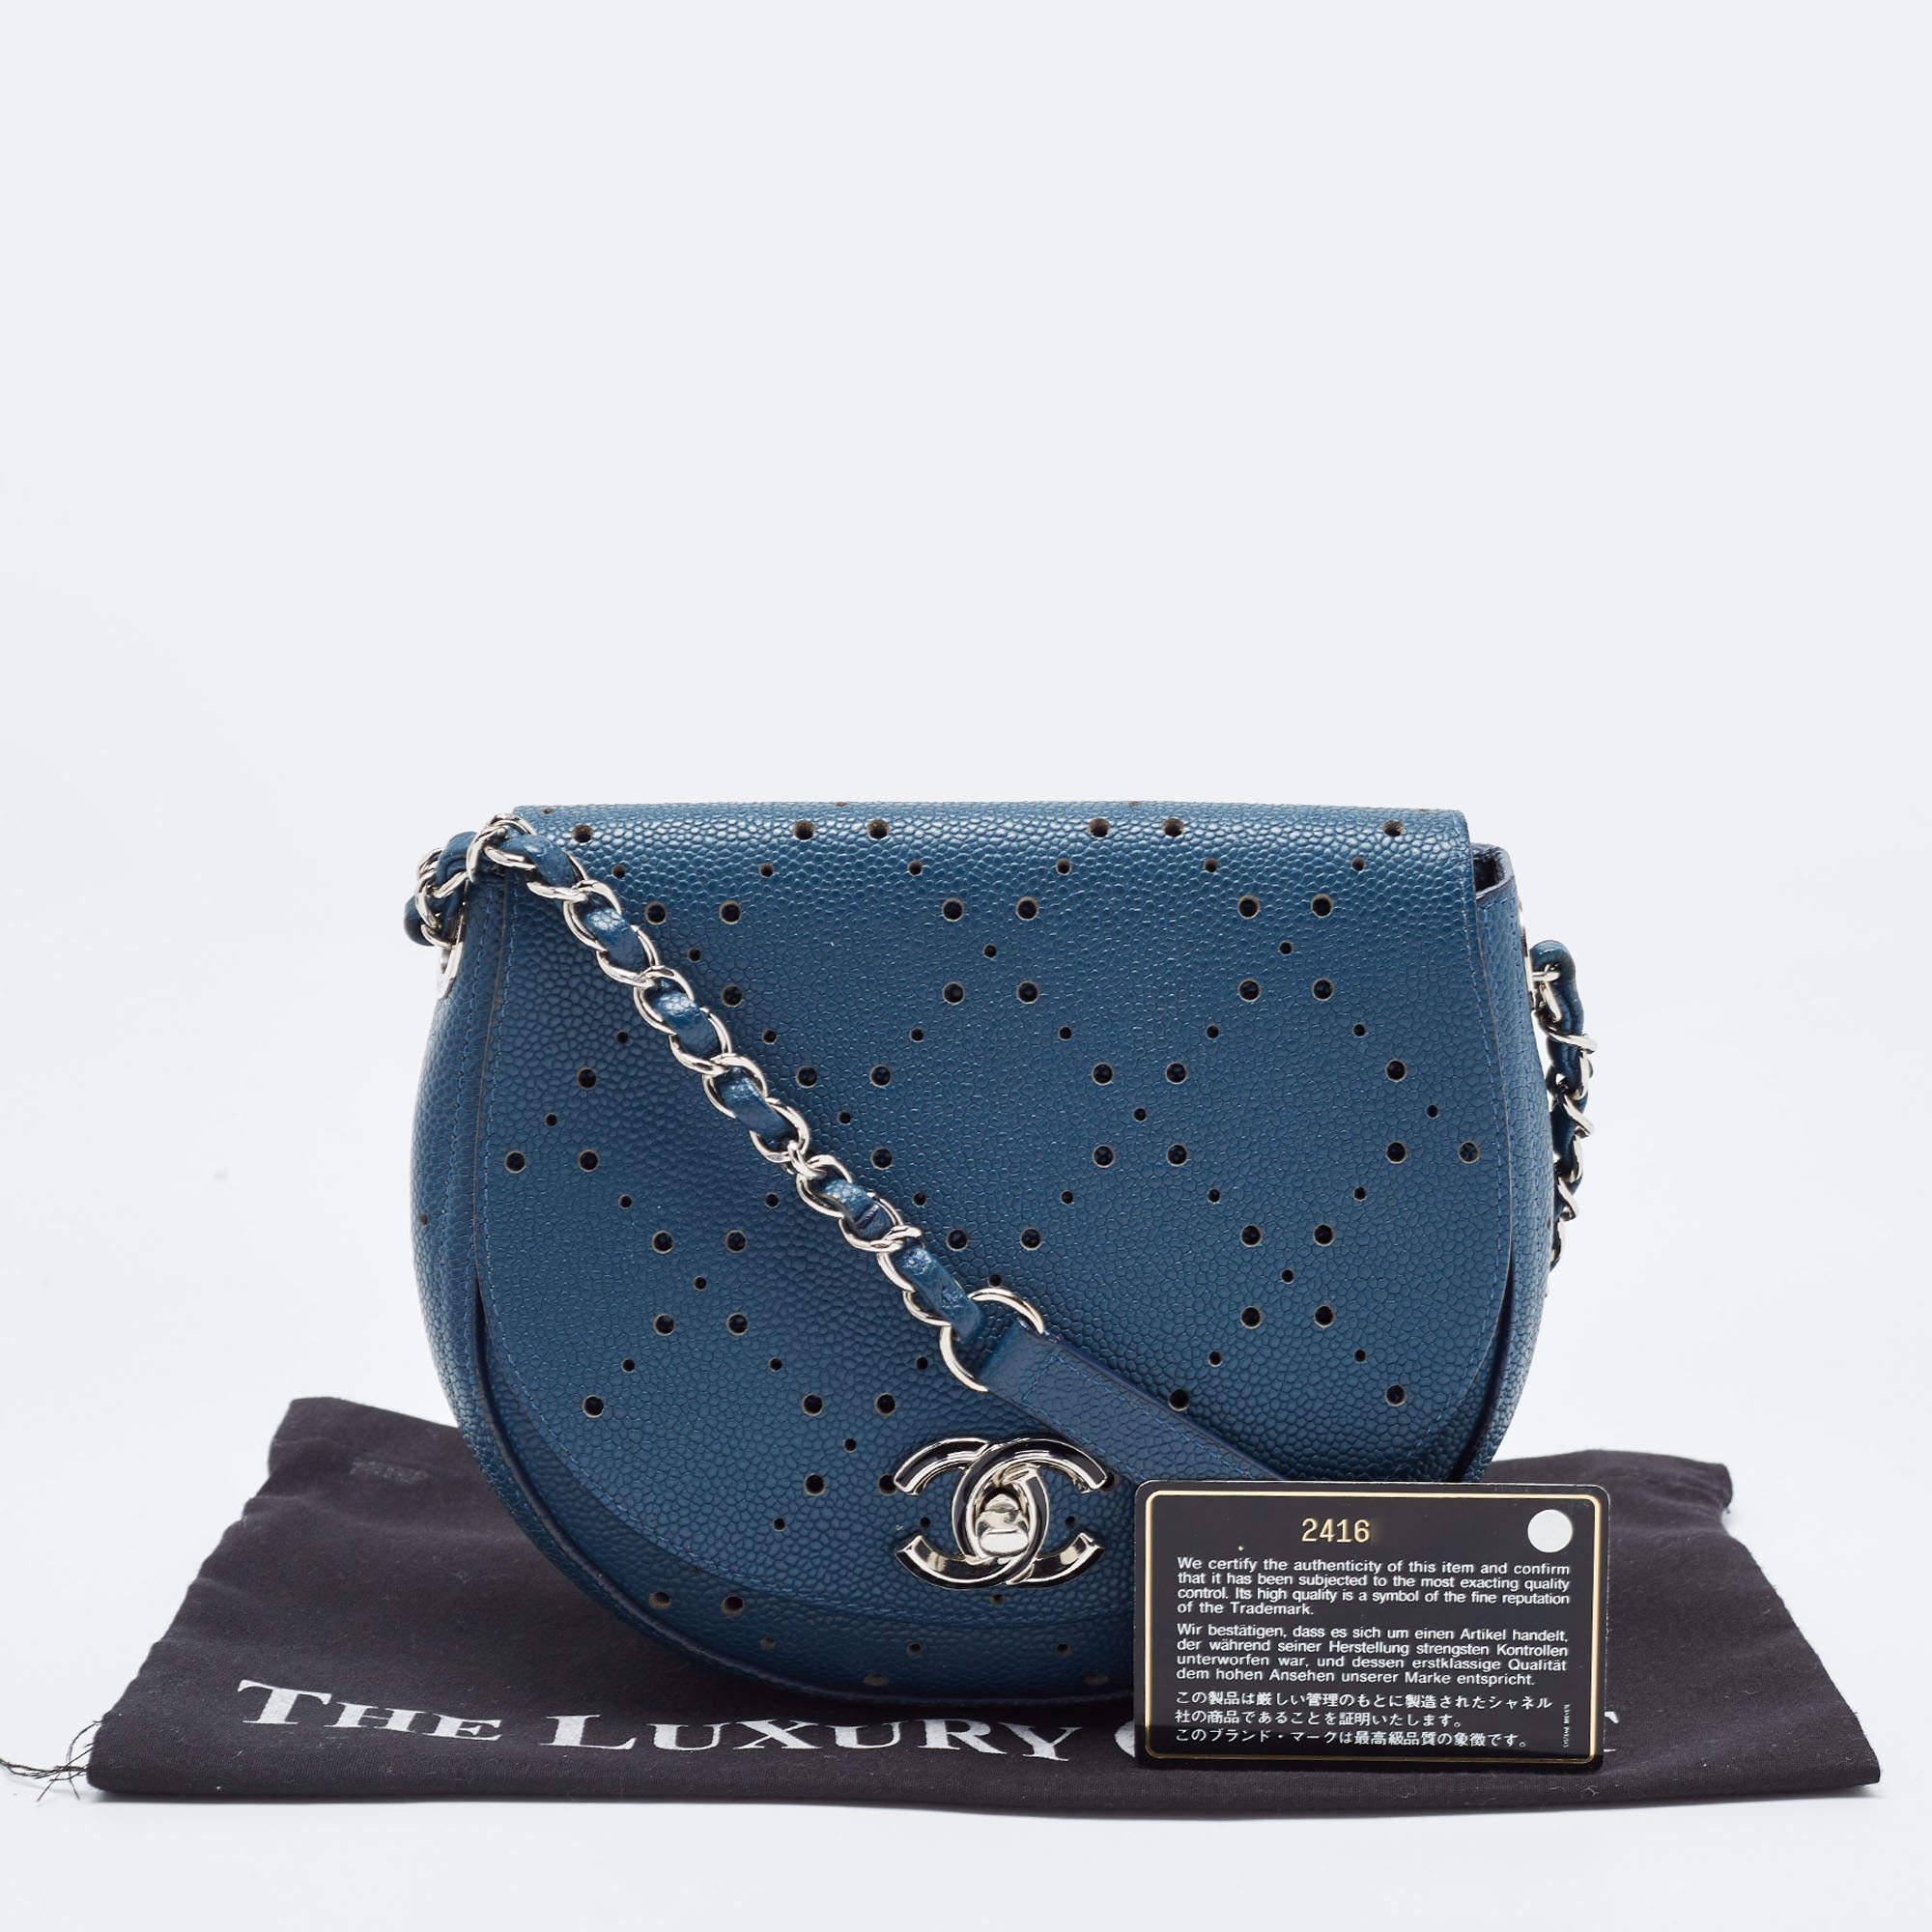 Chanel Blue Quilted Caviar Perforated Leather Crossbody Bag 8